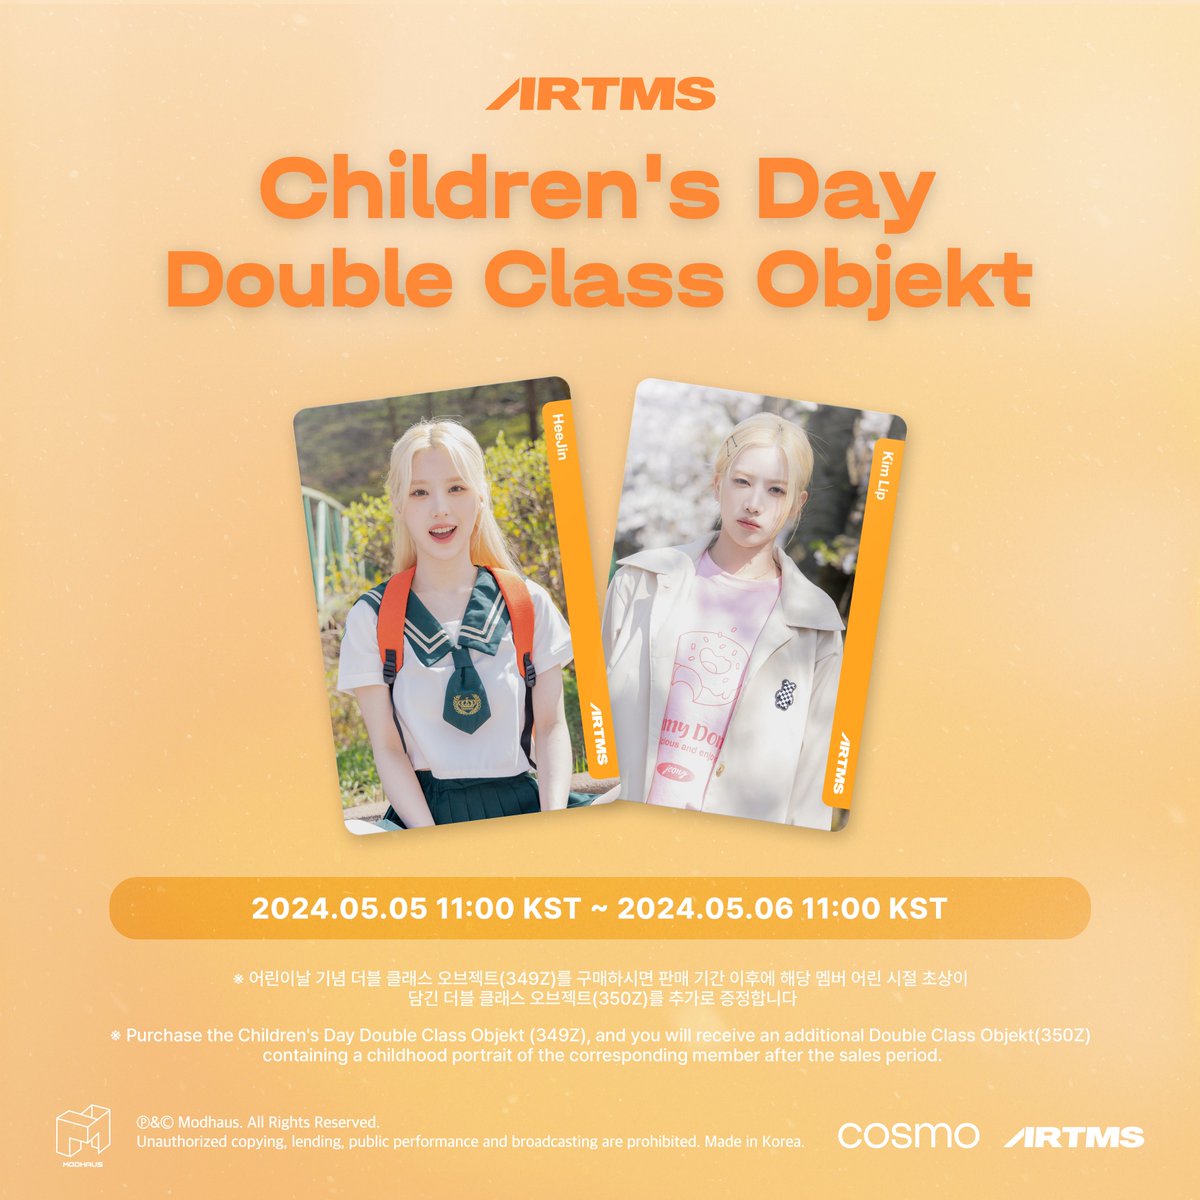 ARTMS
Children's Day Double Class Objekt
Digital Release

2024.05.05 11:00 KST ~ 2024.05.06 11:00 KST

Check out in <COSMO : the Gate>
🔗 bit.ly/4a3QJhl

#ARTMS #OURII